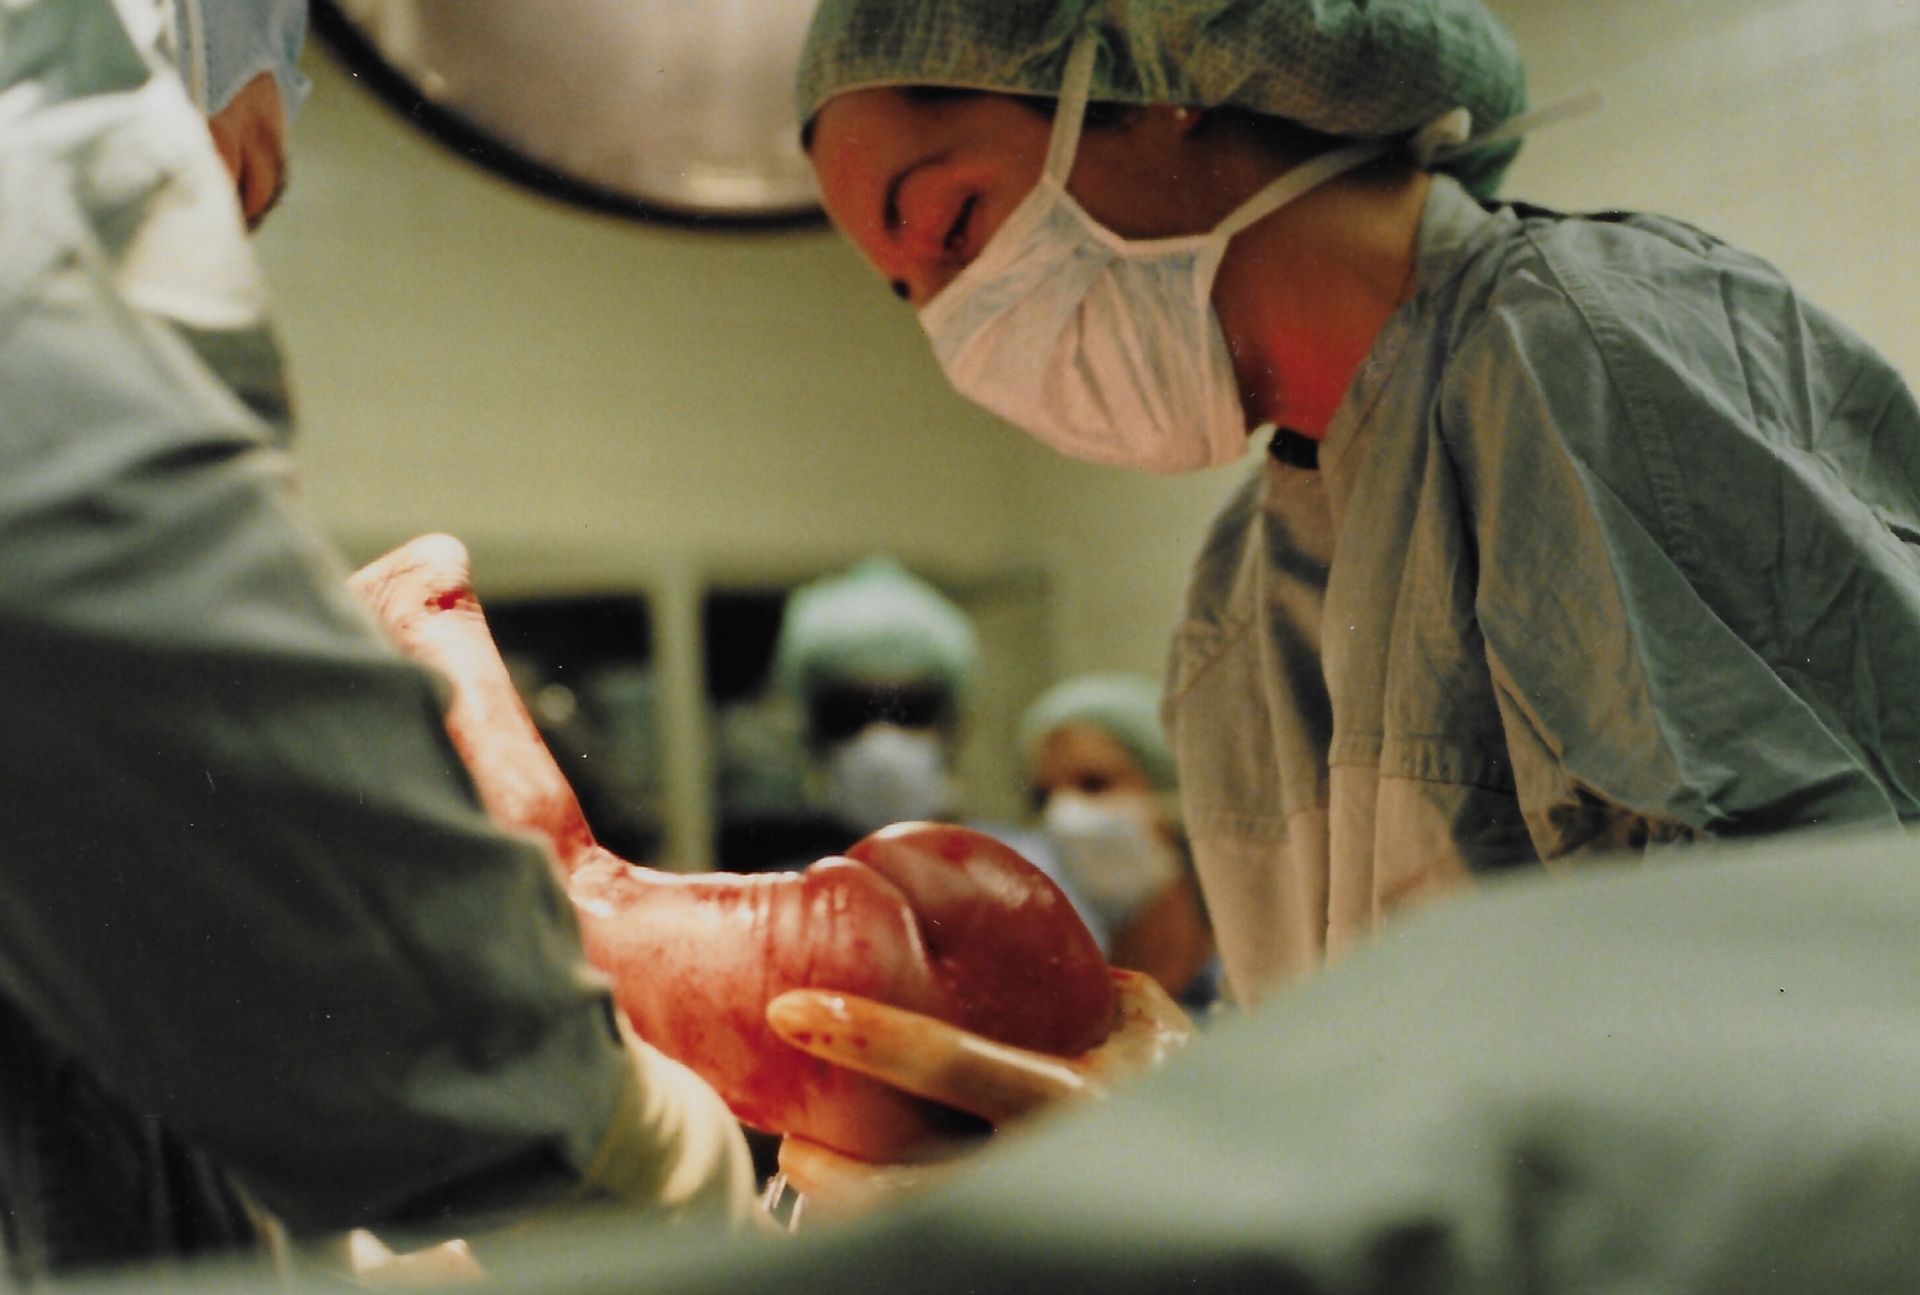 Dr. Susan Collins Black holding a newborn baby in an operating theater